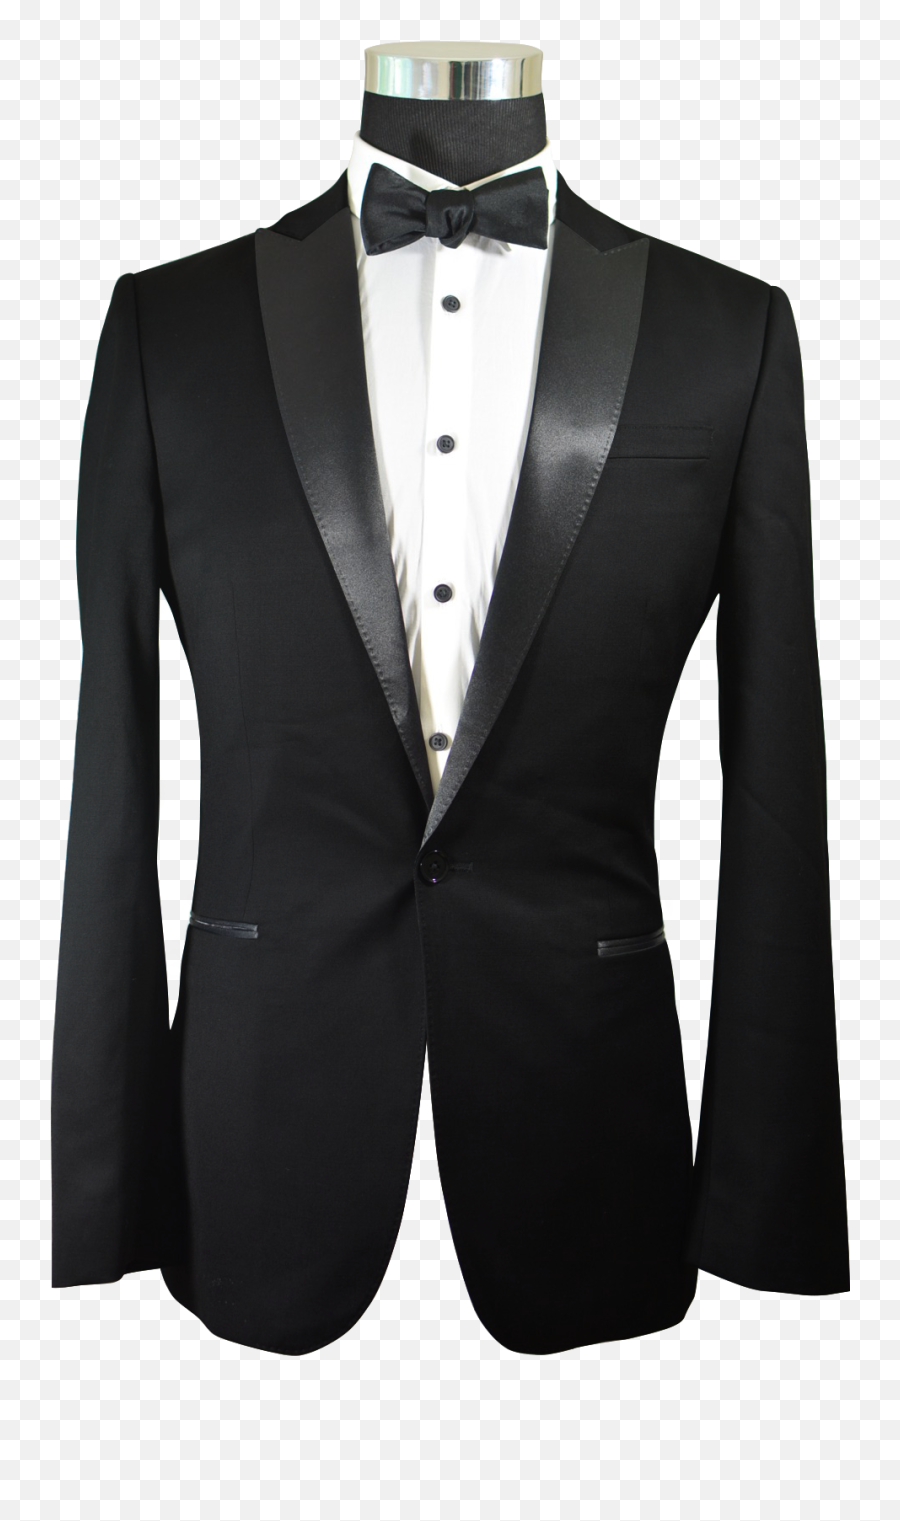 Suit Png Images Free Download - Navy Blue Tuxedo Jacket,Tuxedo Png